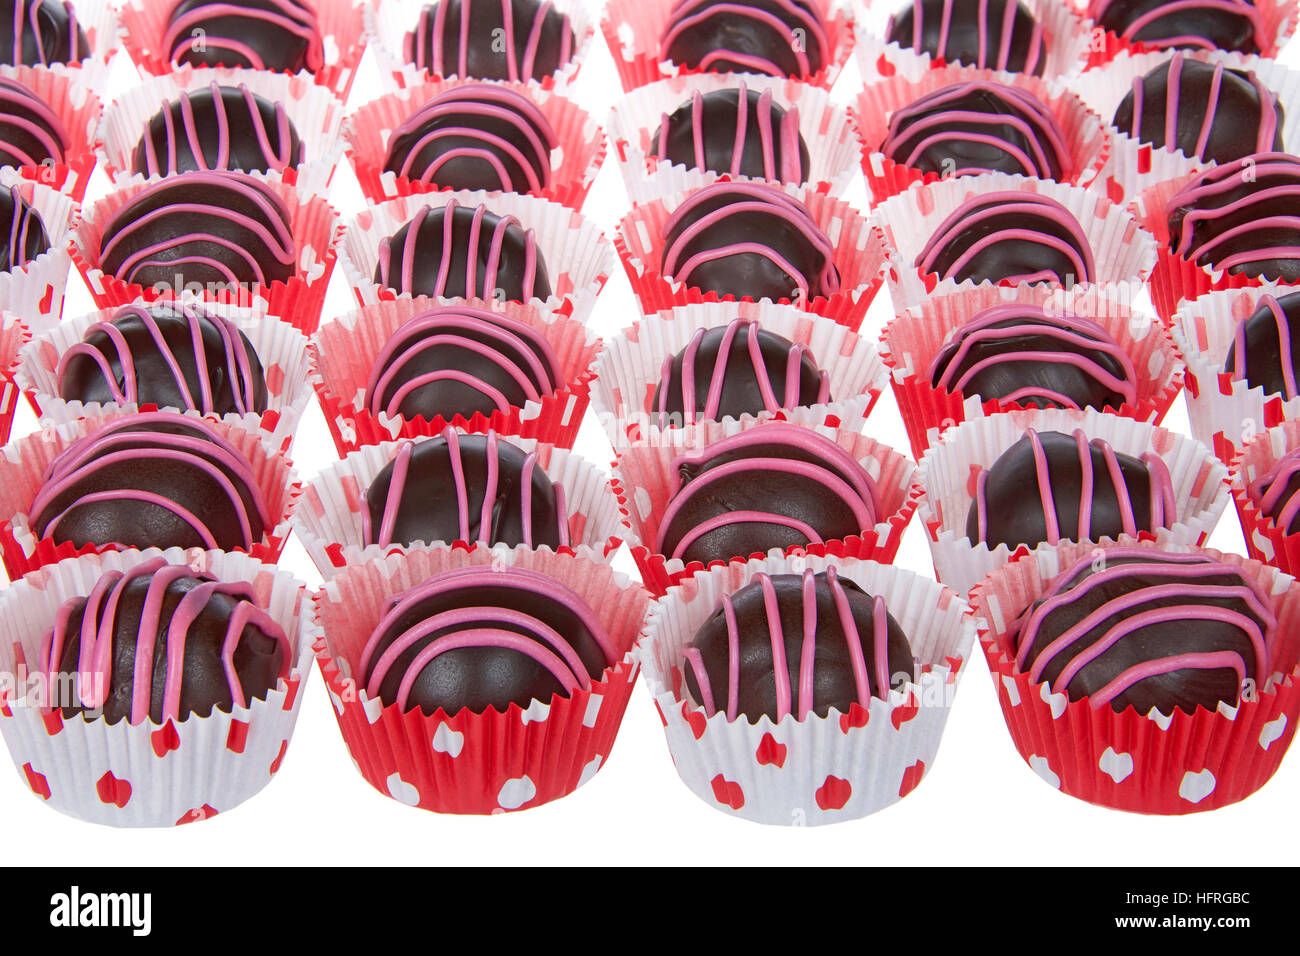 Chocolate cake balls stripped with pink candy melts for Valentines Day  treats. Presented in miniature cupcake liners pink white and red polka dots  on Stock Photo - Alamy